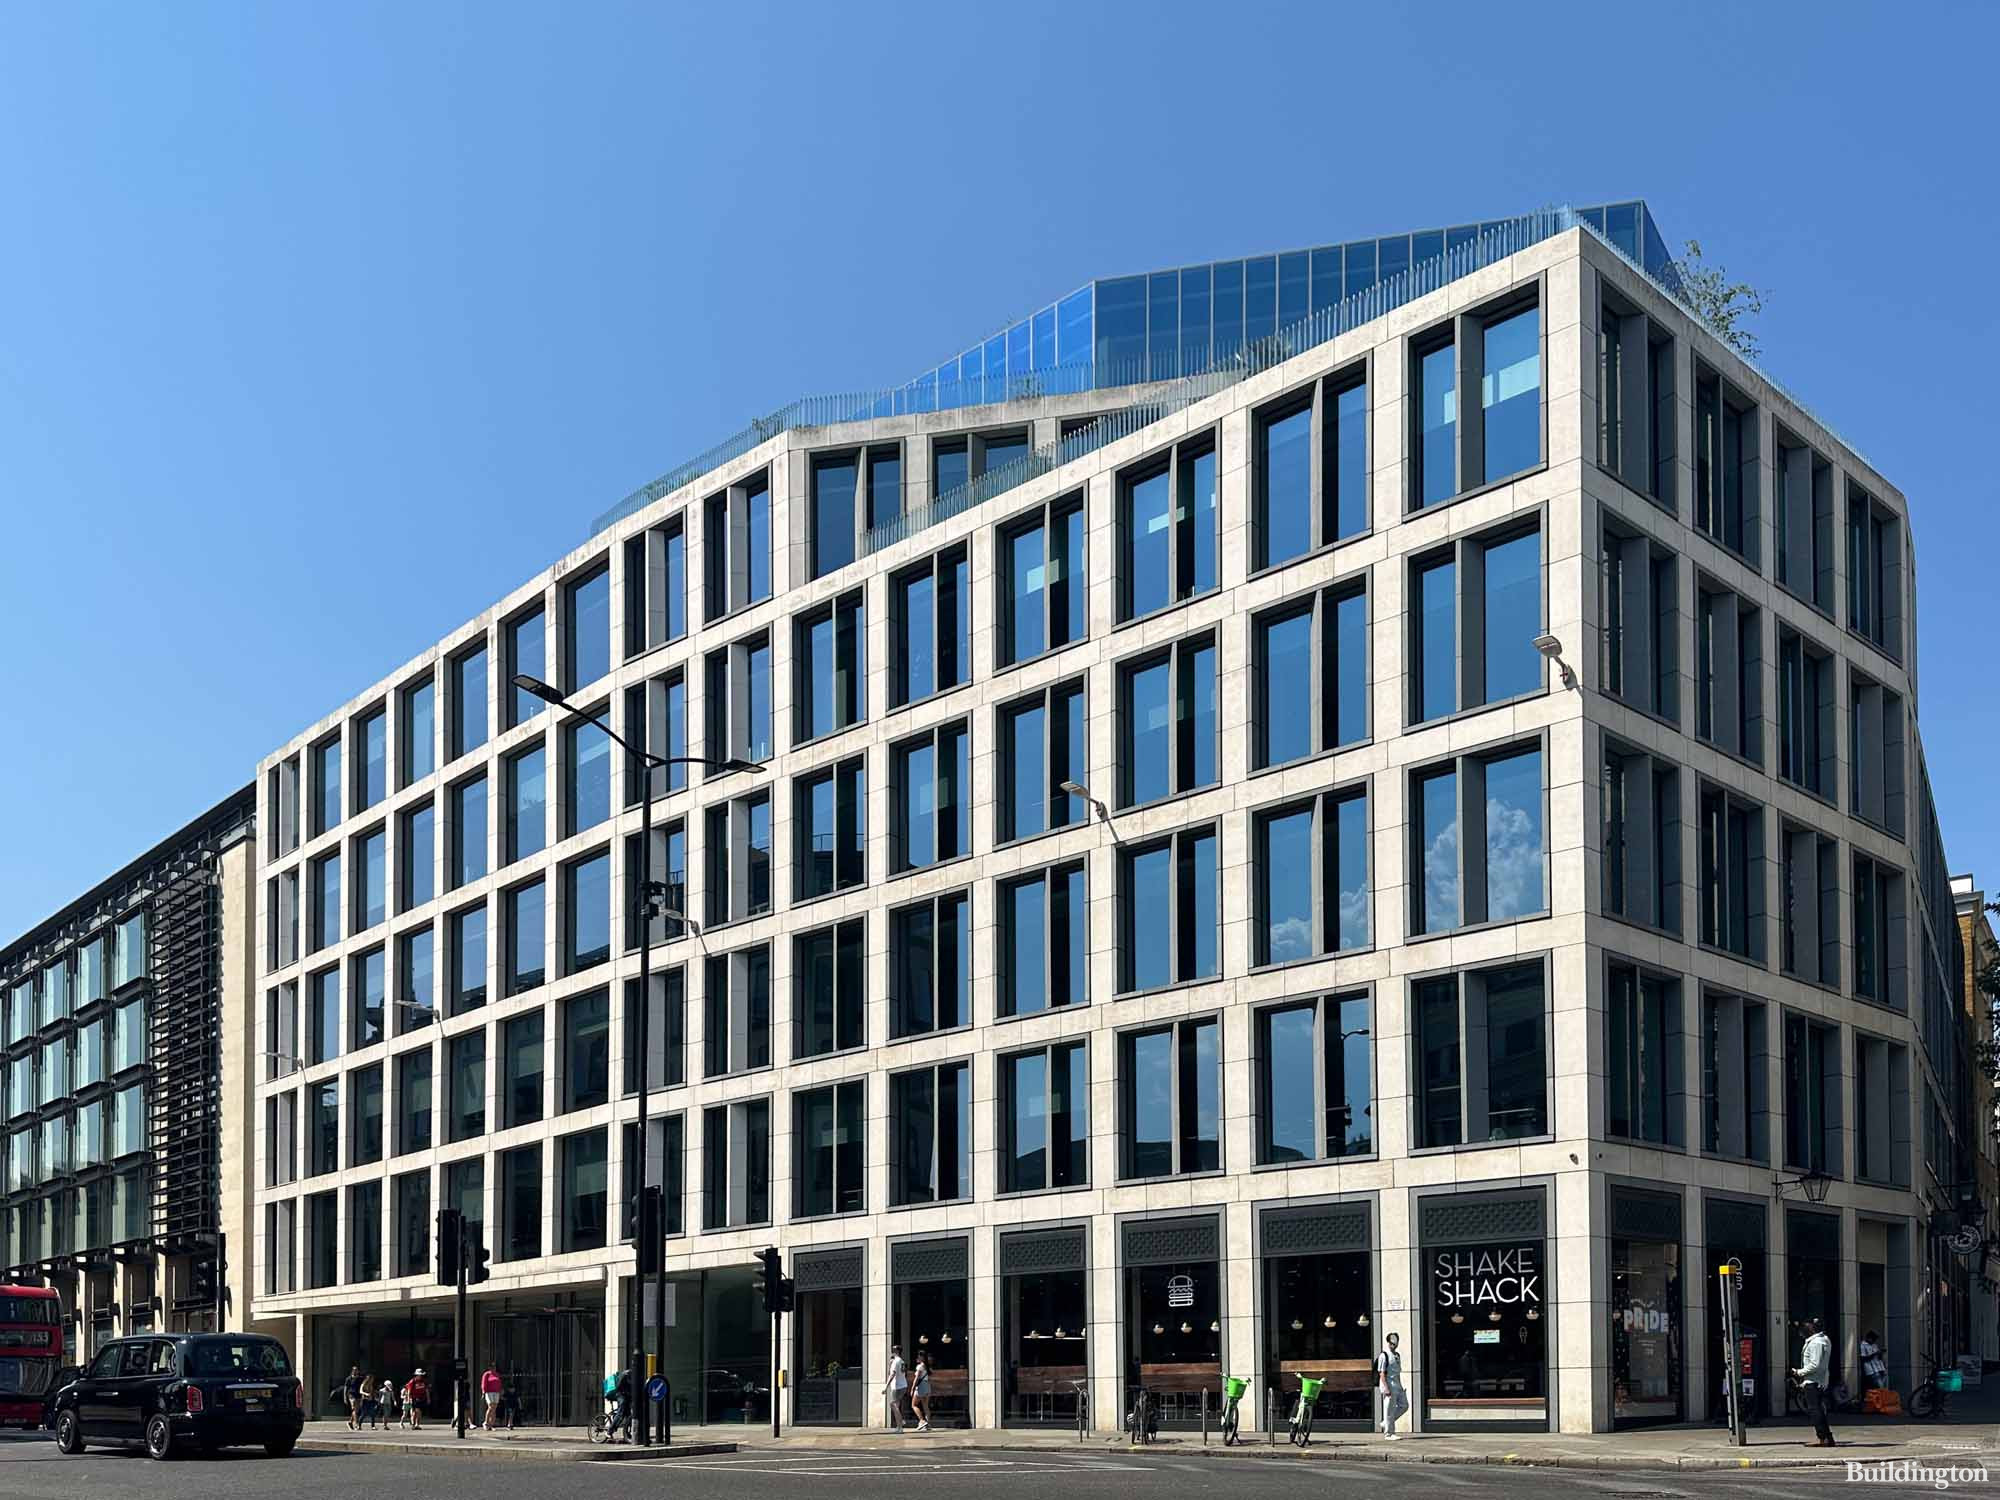 45 Cannon Street office building in the City of London EC4